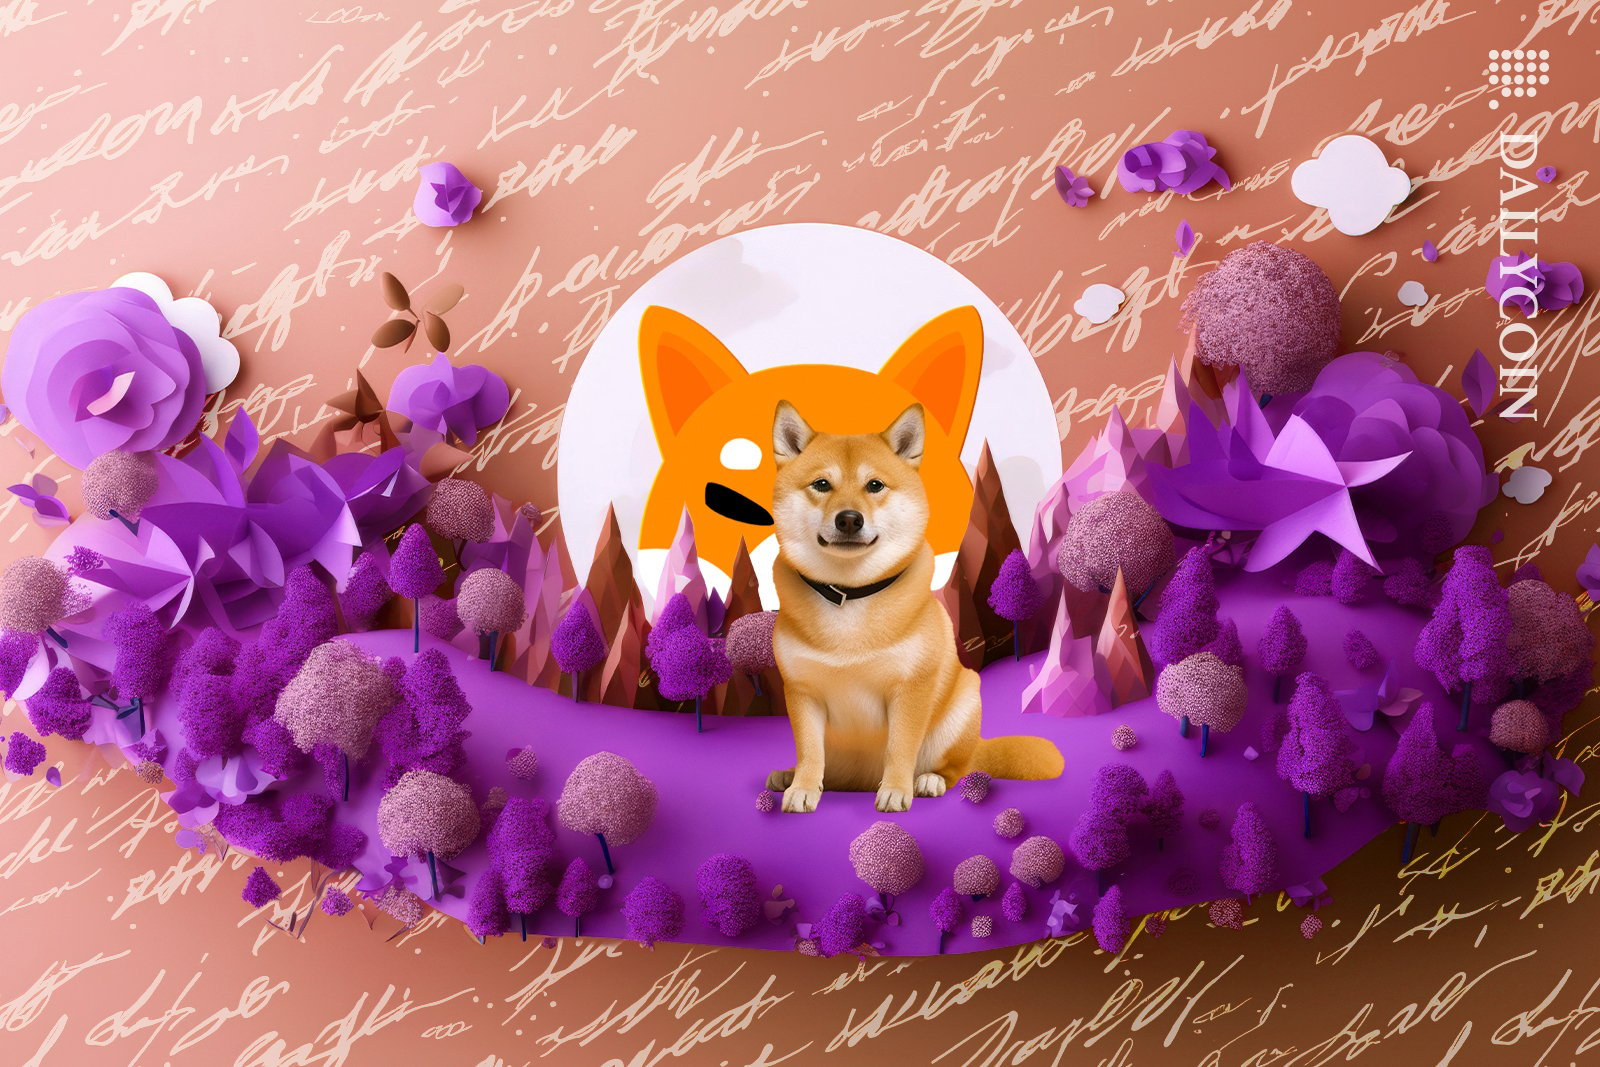 Shiba inu on a floaring land podium with a bunch of signitures.